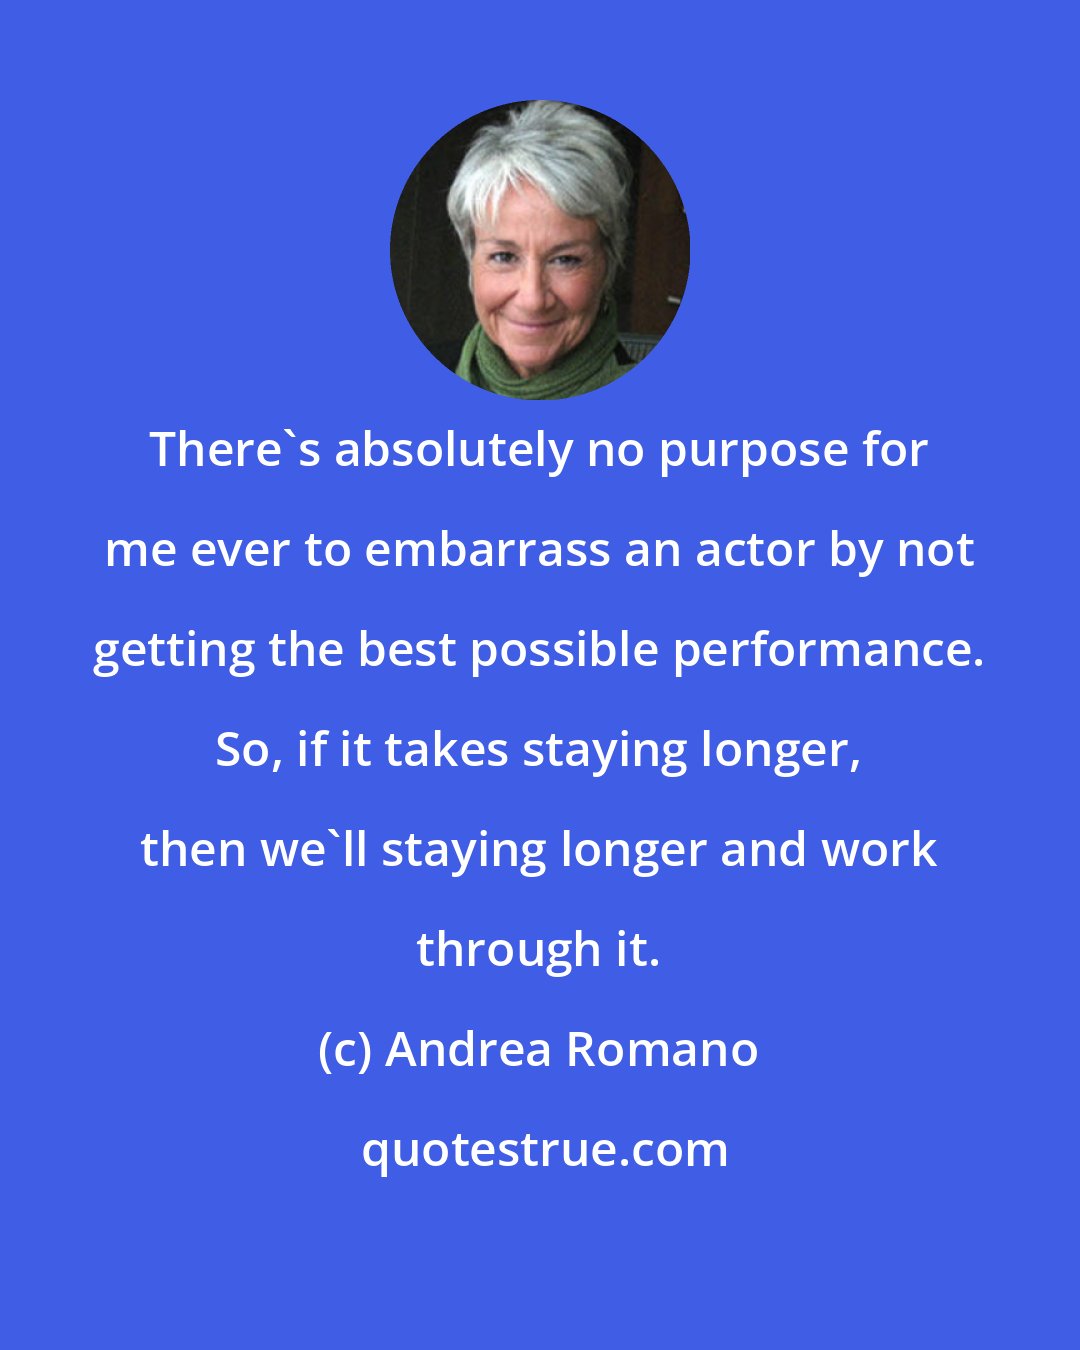 Andrea Romano: There's absolutely no purpose for me ever to embarrass an actor by not getting the best possible performance. So, if it takes staying longer, then we'll staying longer and work through it.